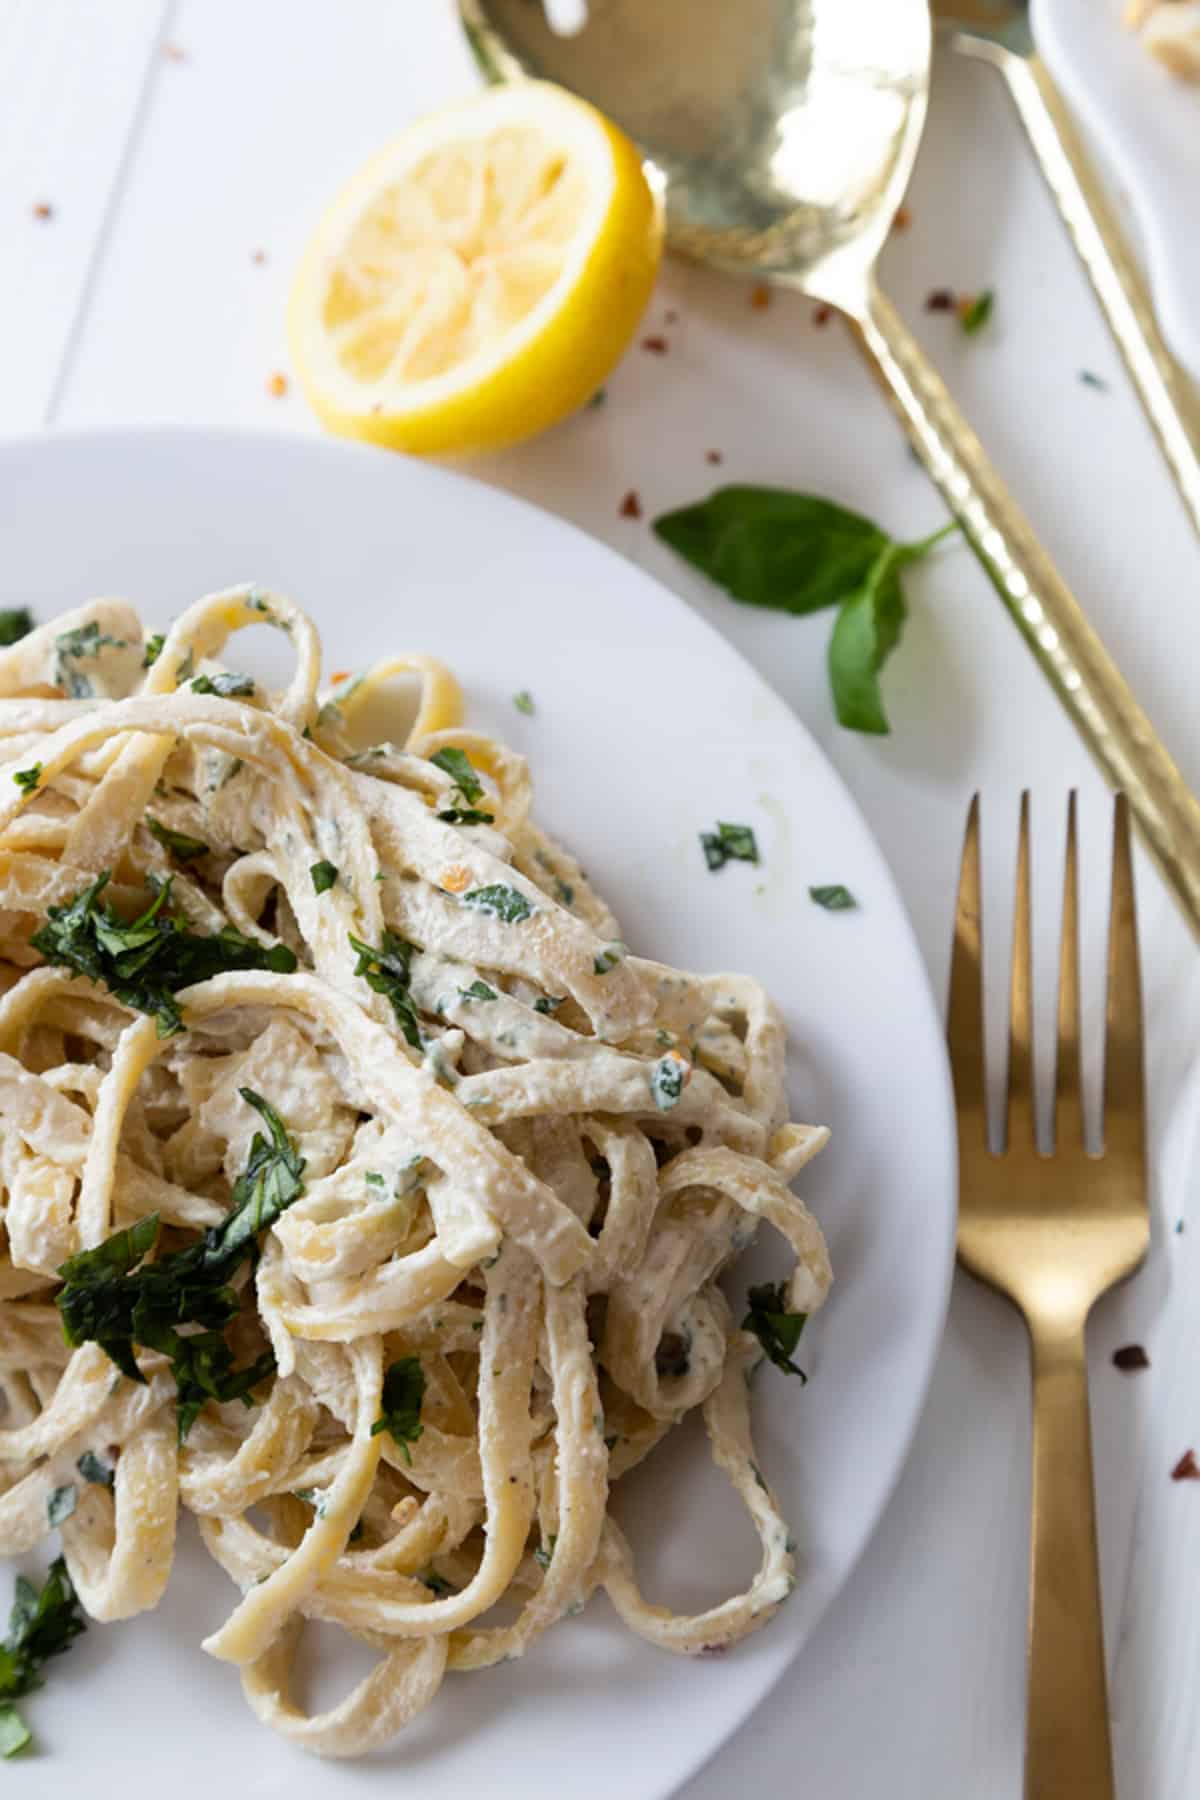 A white plate with vegan fettuccine Alfredo sprinkled with chopped basil and a gold fork and serving utensils next to the plate.